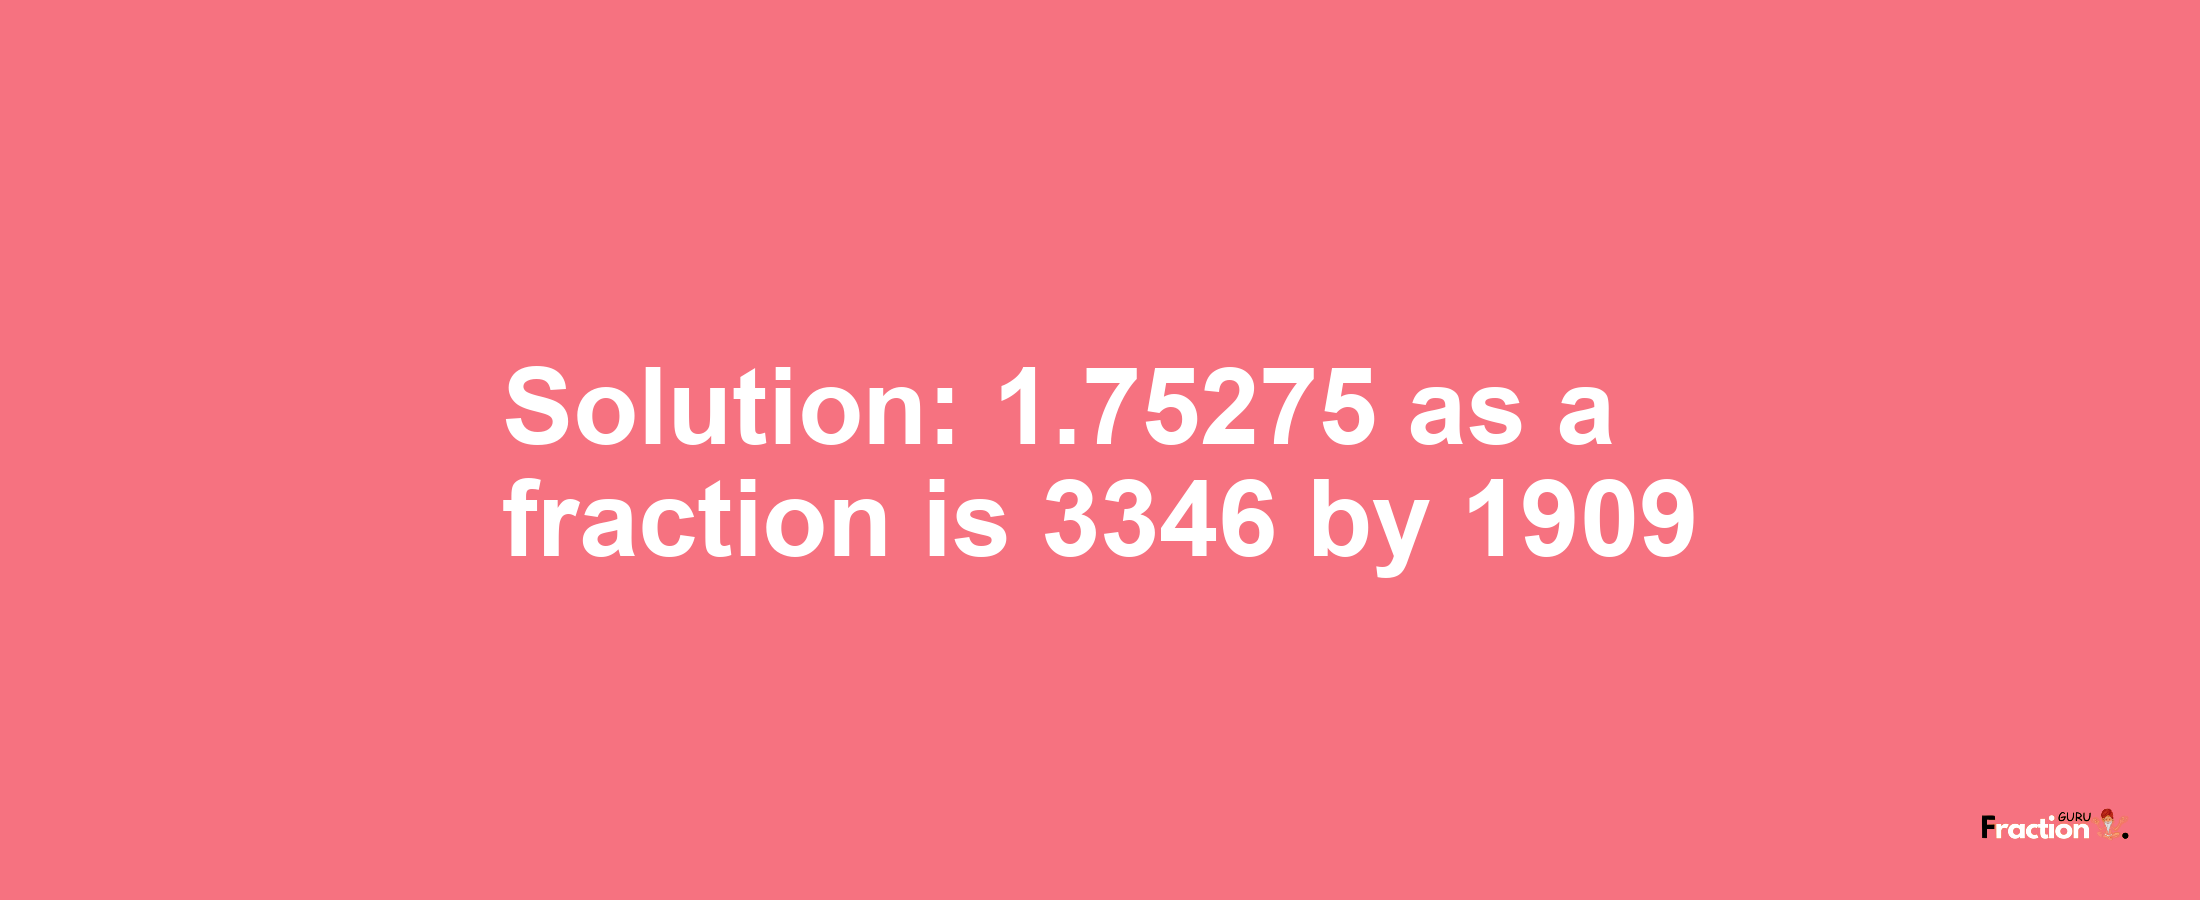 Solution:1.75275 as a fraction is 3346/1909